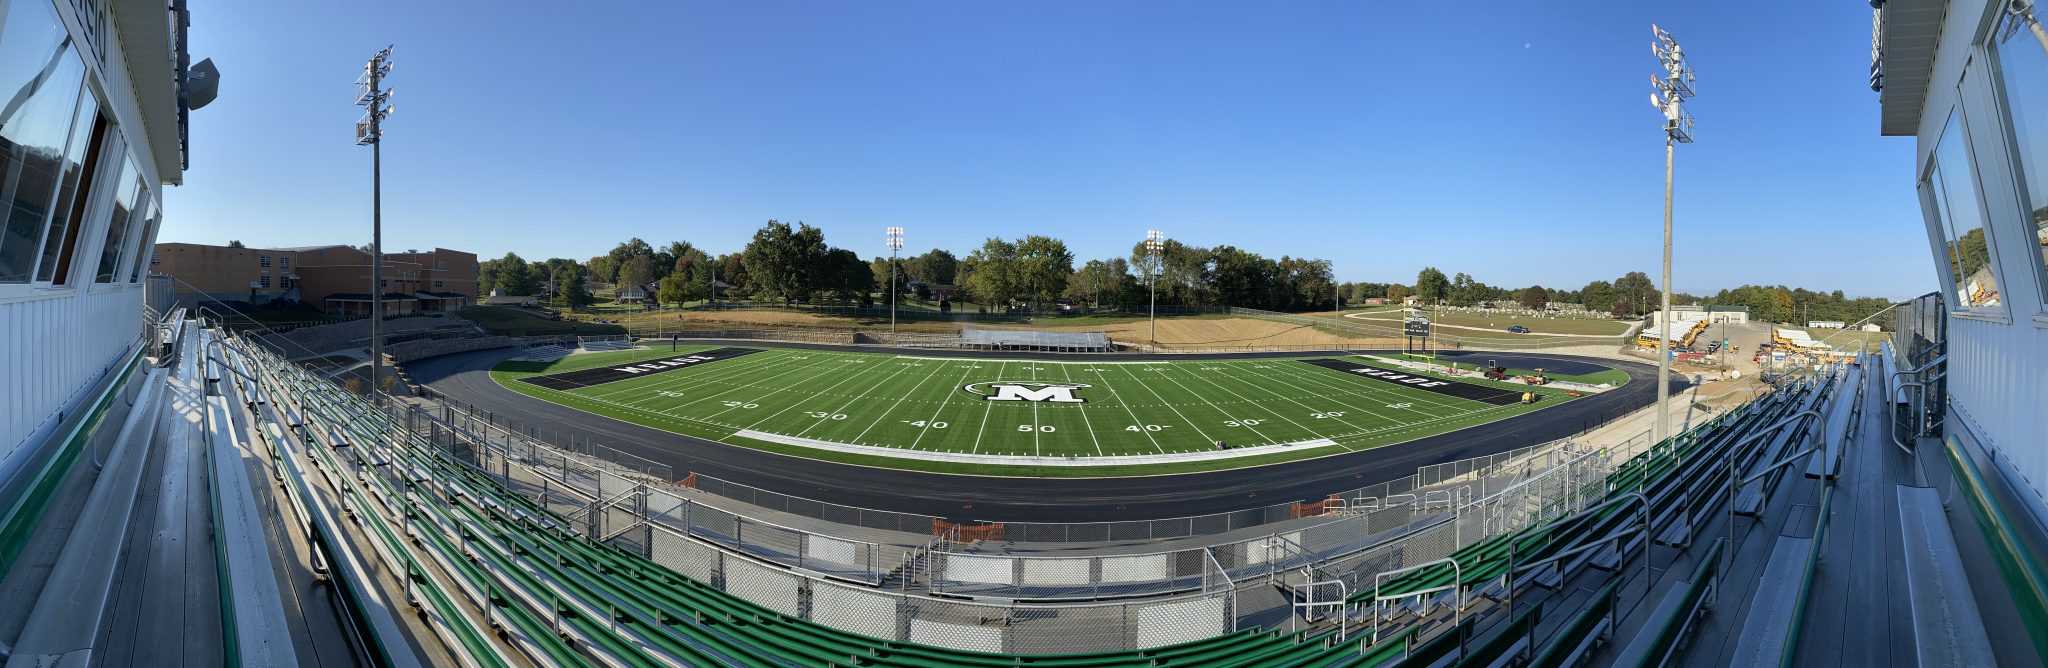 Meade County High School Athletic Complex Renovation Sherman Carter